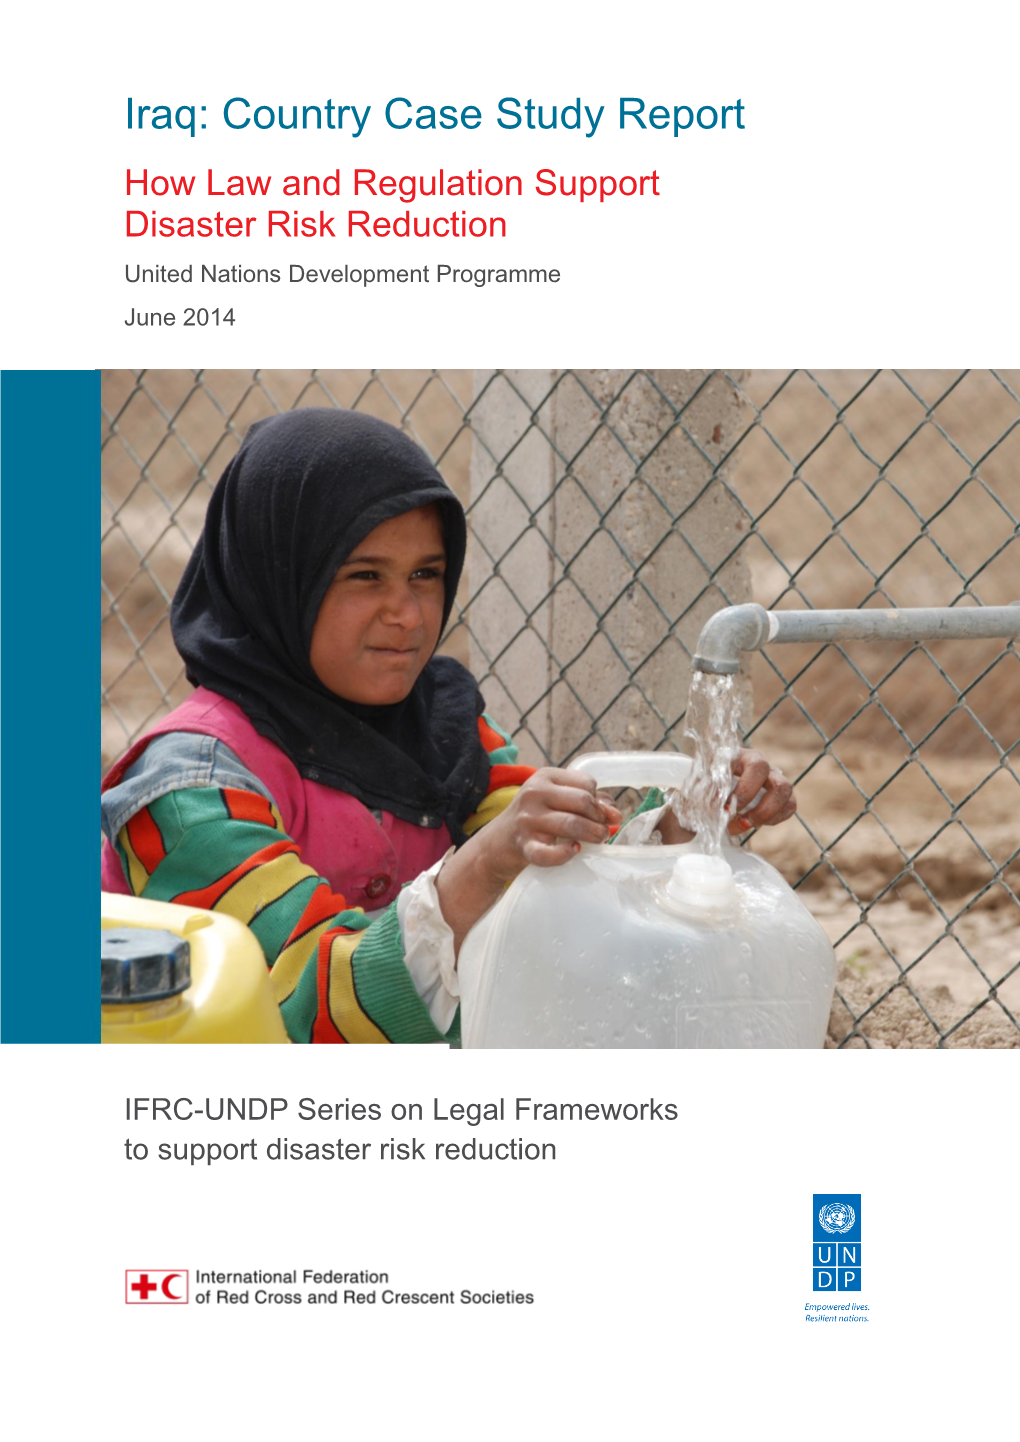 Disaster Risk Reduction Law: Iraq Case Study